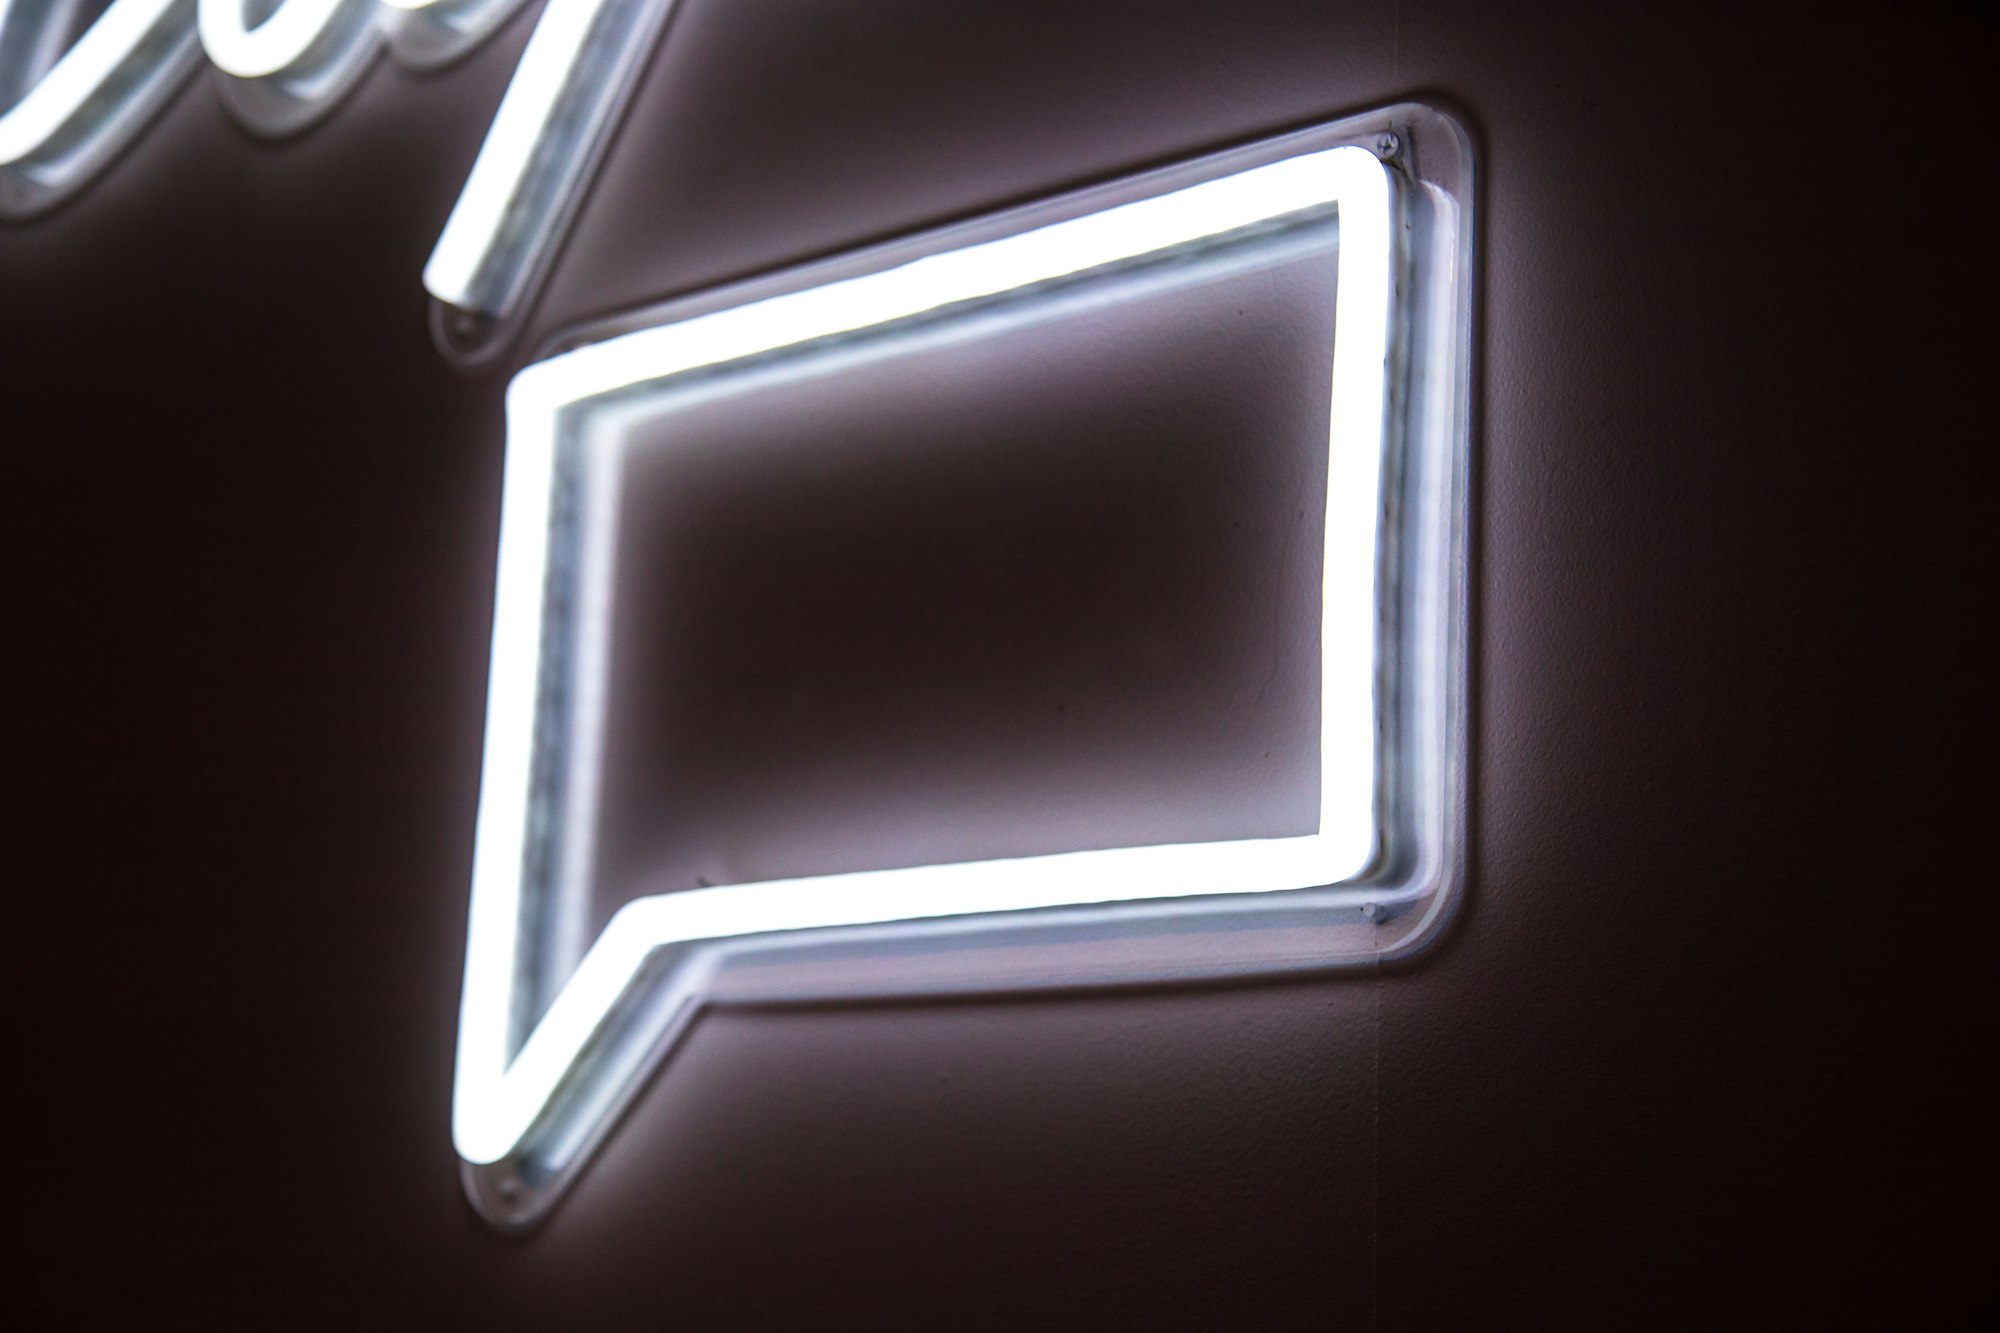 white neon light signage on wall like a social media chat bubble